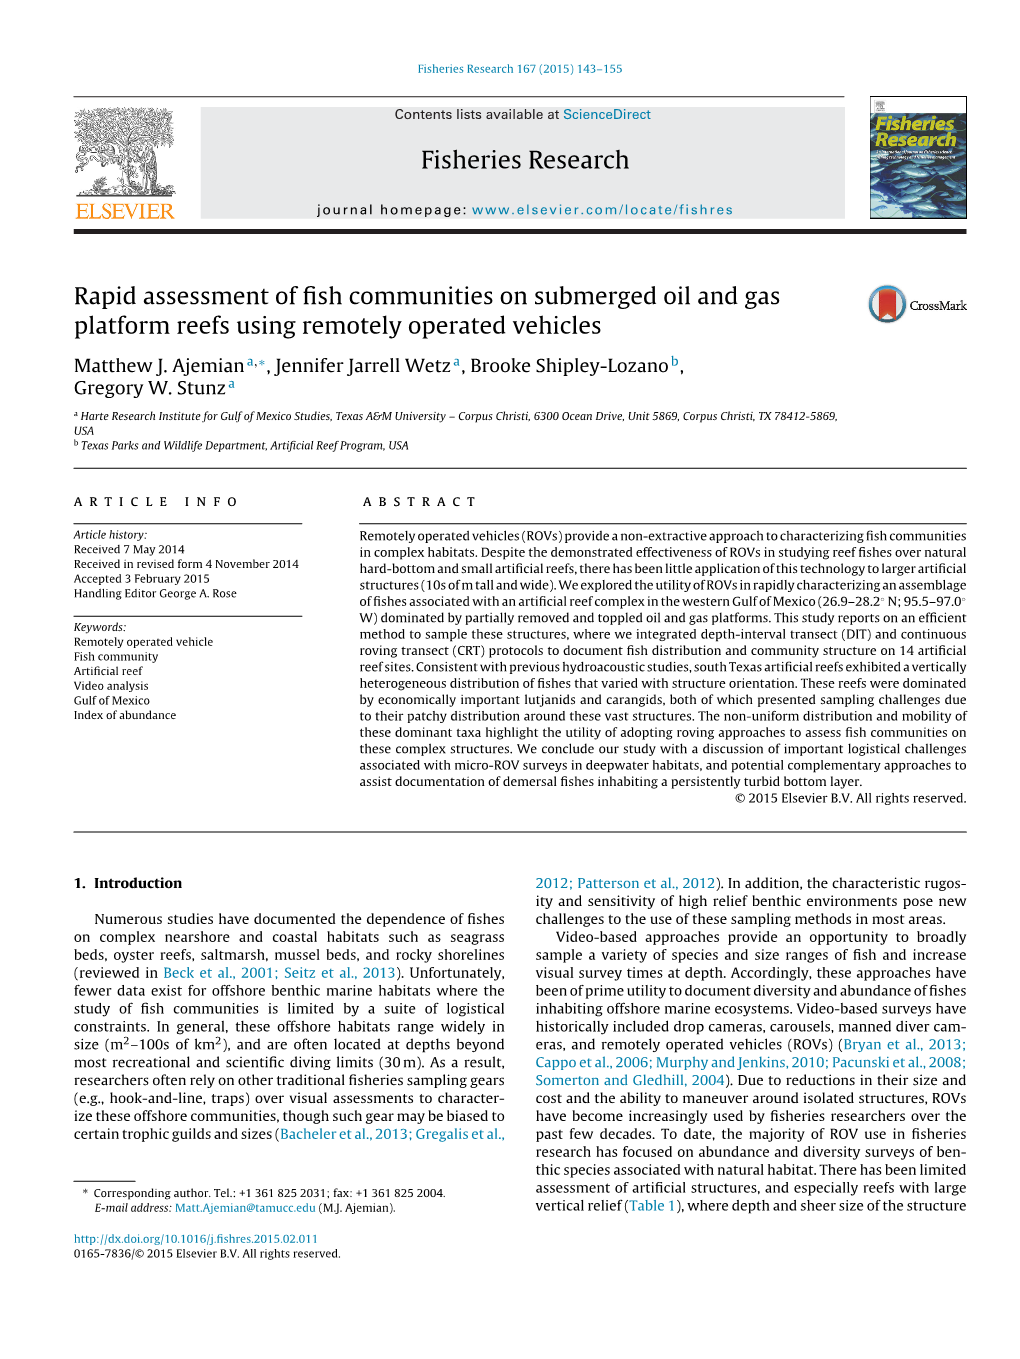 Rapid Assessment of Fish Communities on Submerged Oil and Gas Platform Reefs Using Remotely Operated Vehicles